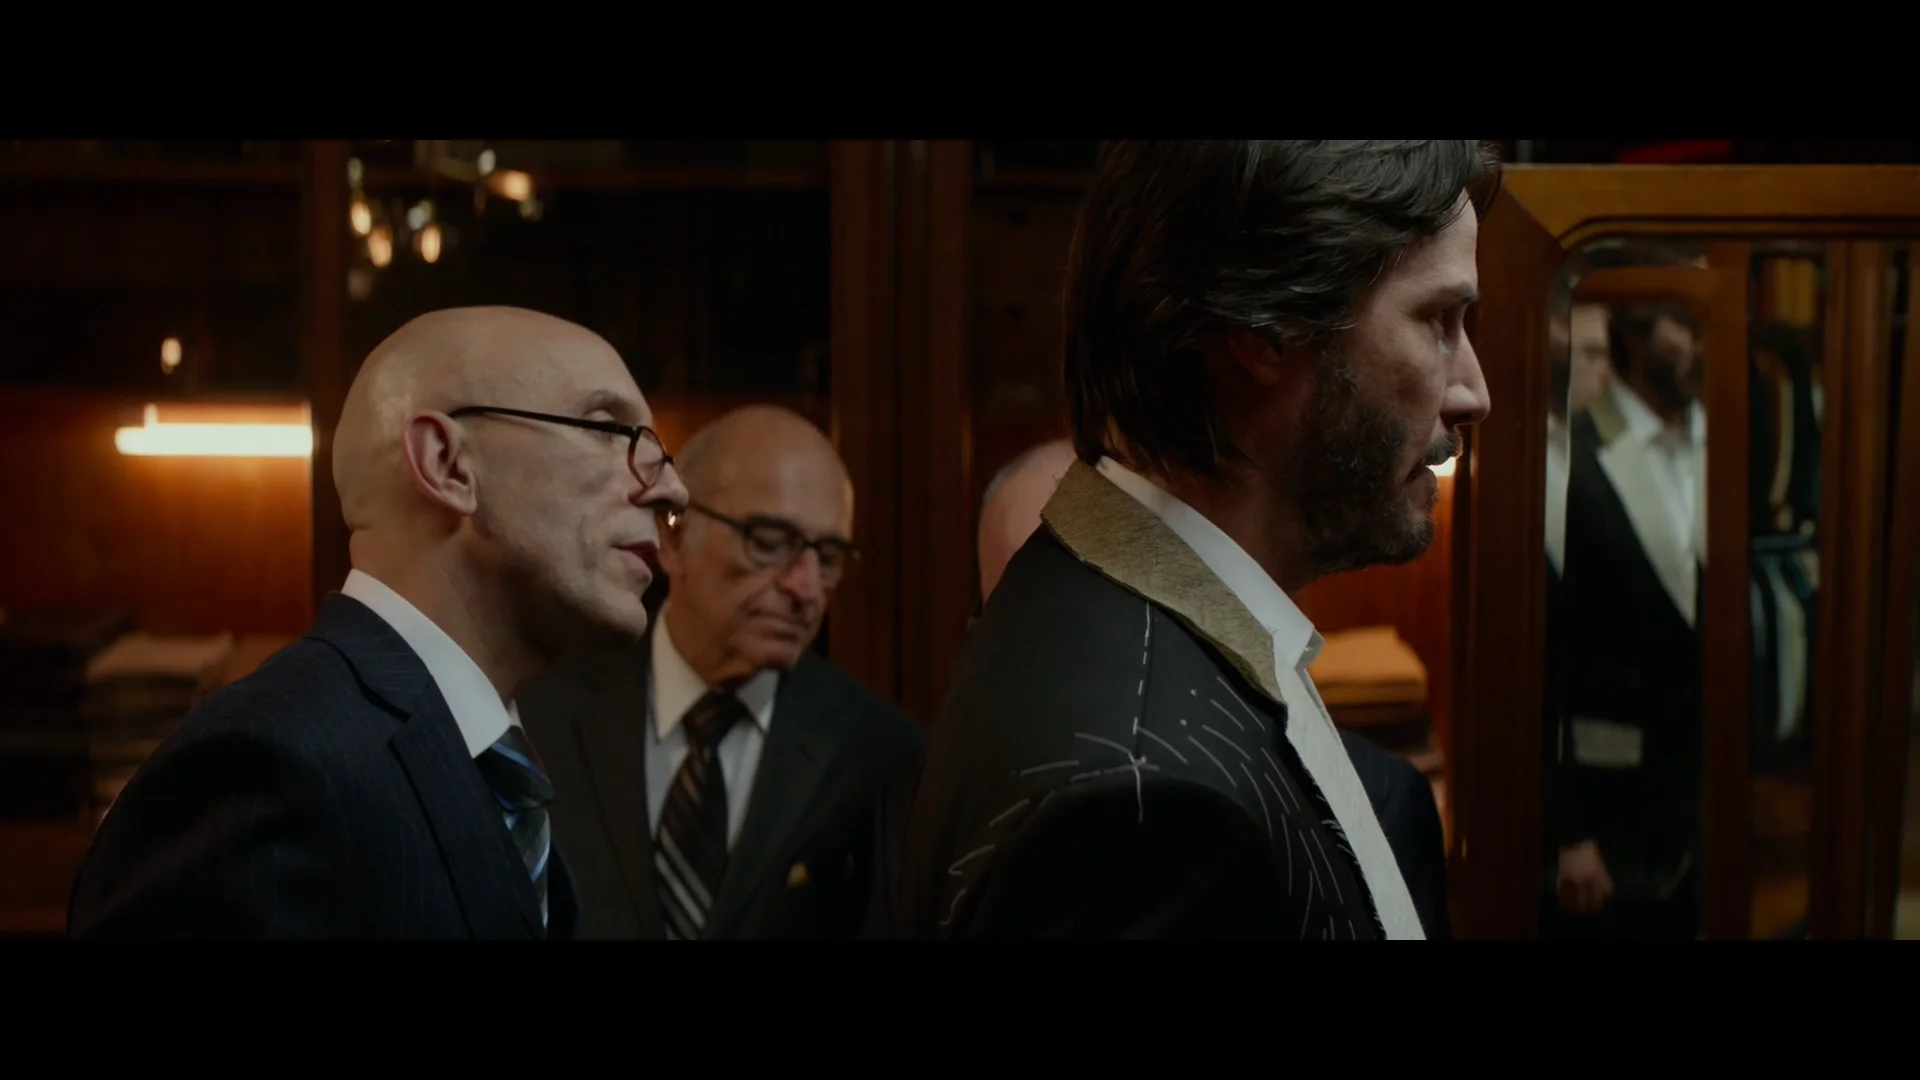 Detail Oriented: John Wick Costume Designer Luca Mosca, Part Two - Film  Independent